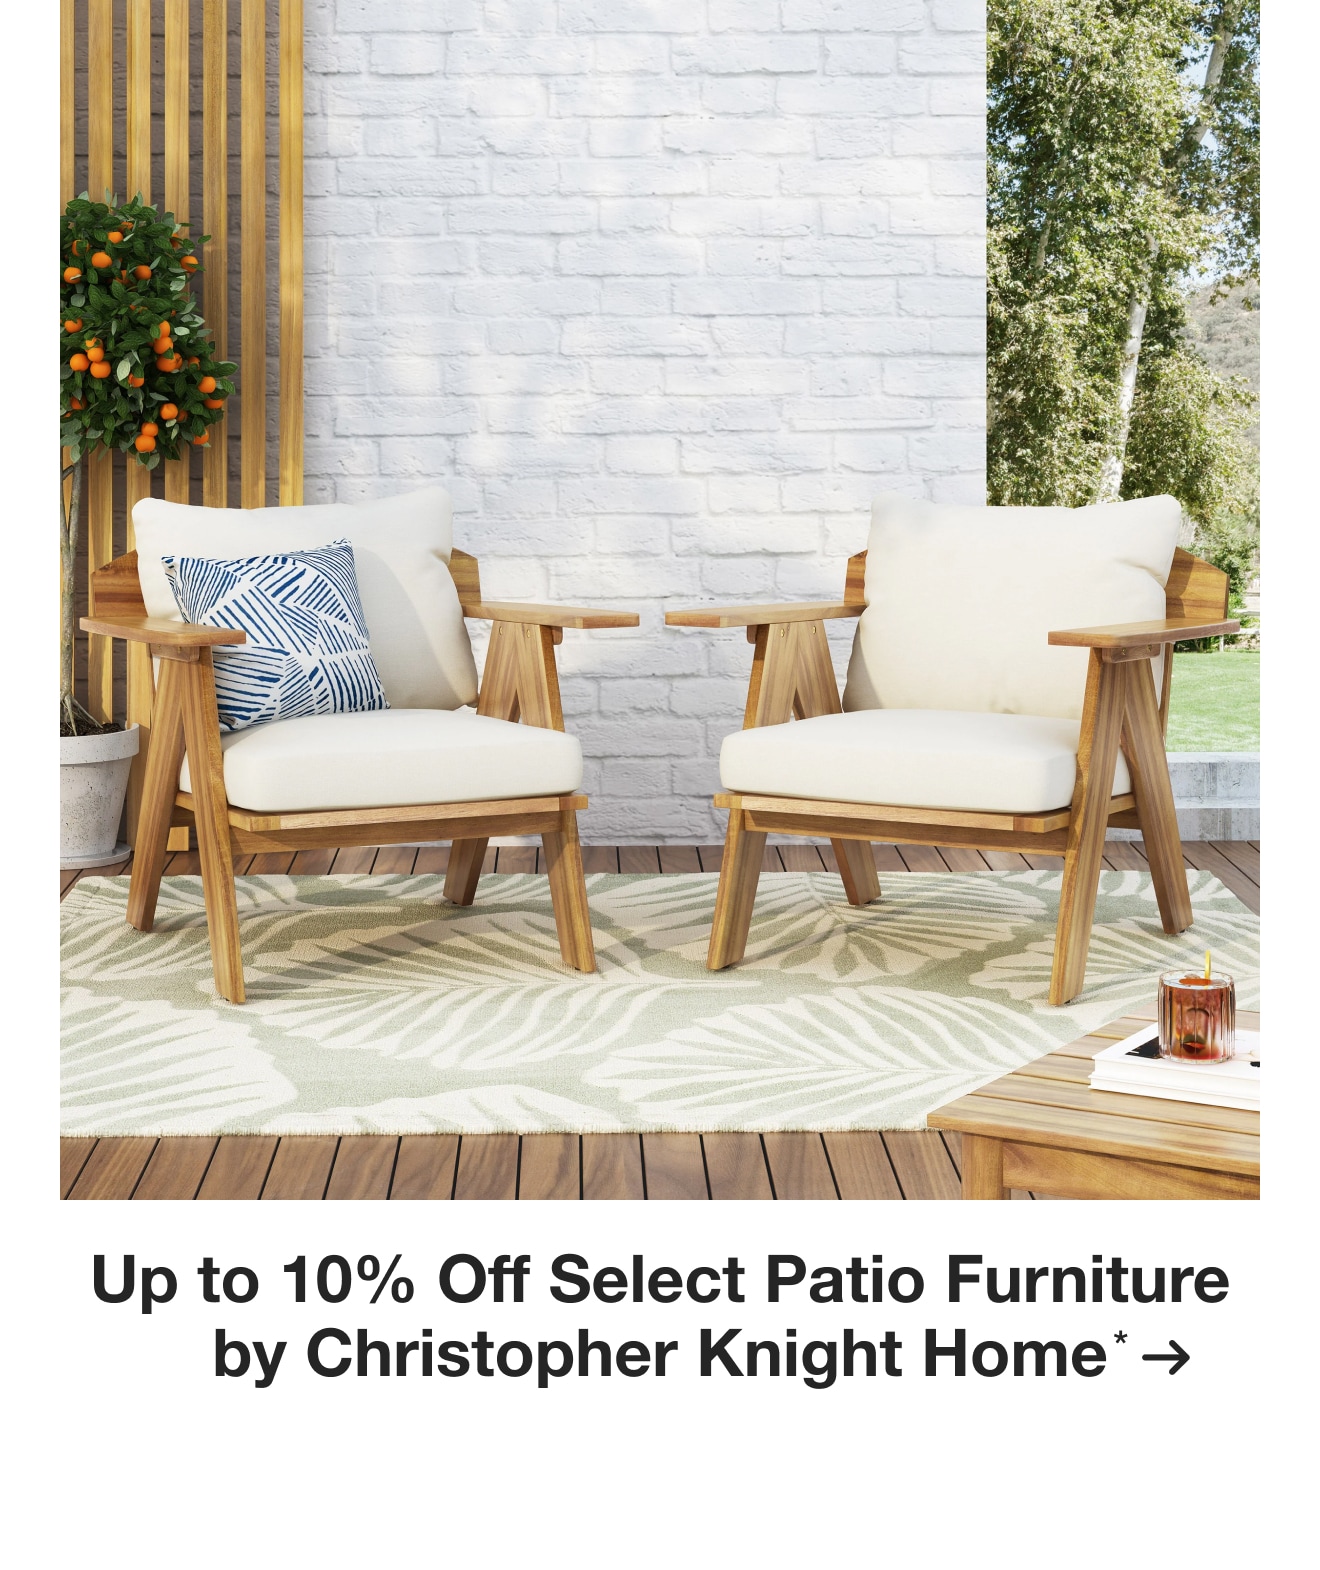 Up to 10% Off Select Furniture by Christopher Knight Home*